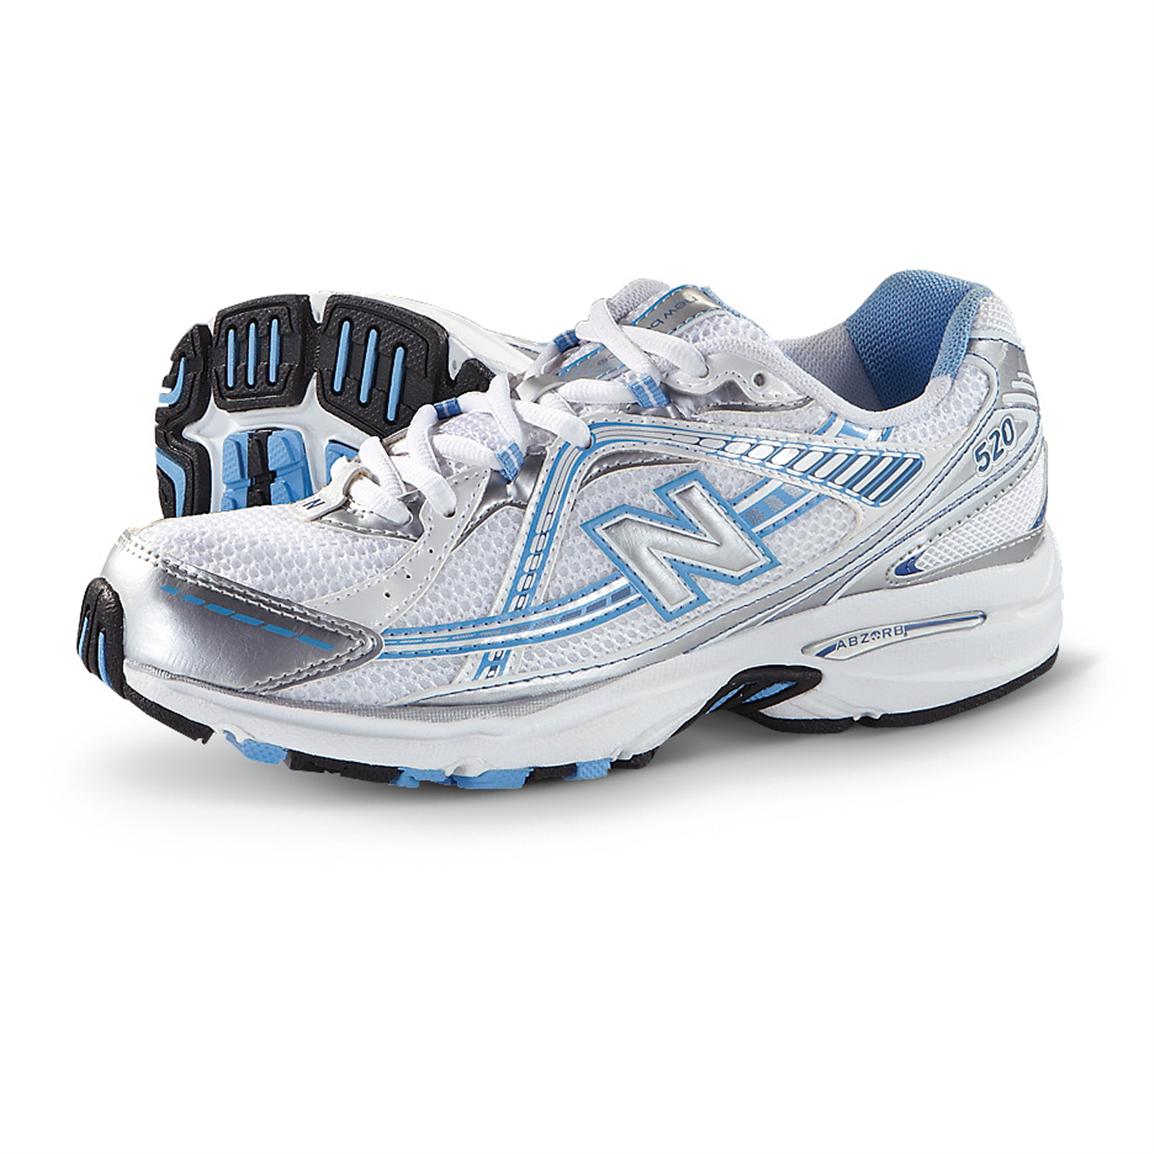 Women's New Balance® 520 Cross Trainers, Silver / White / Blue 235675, Running Shoes